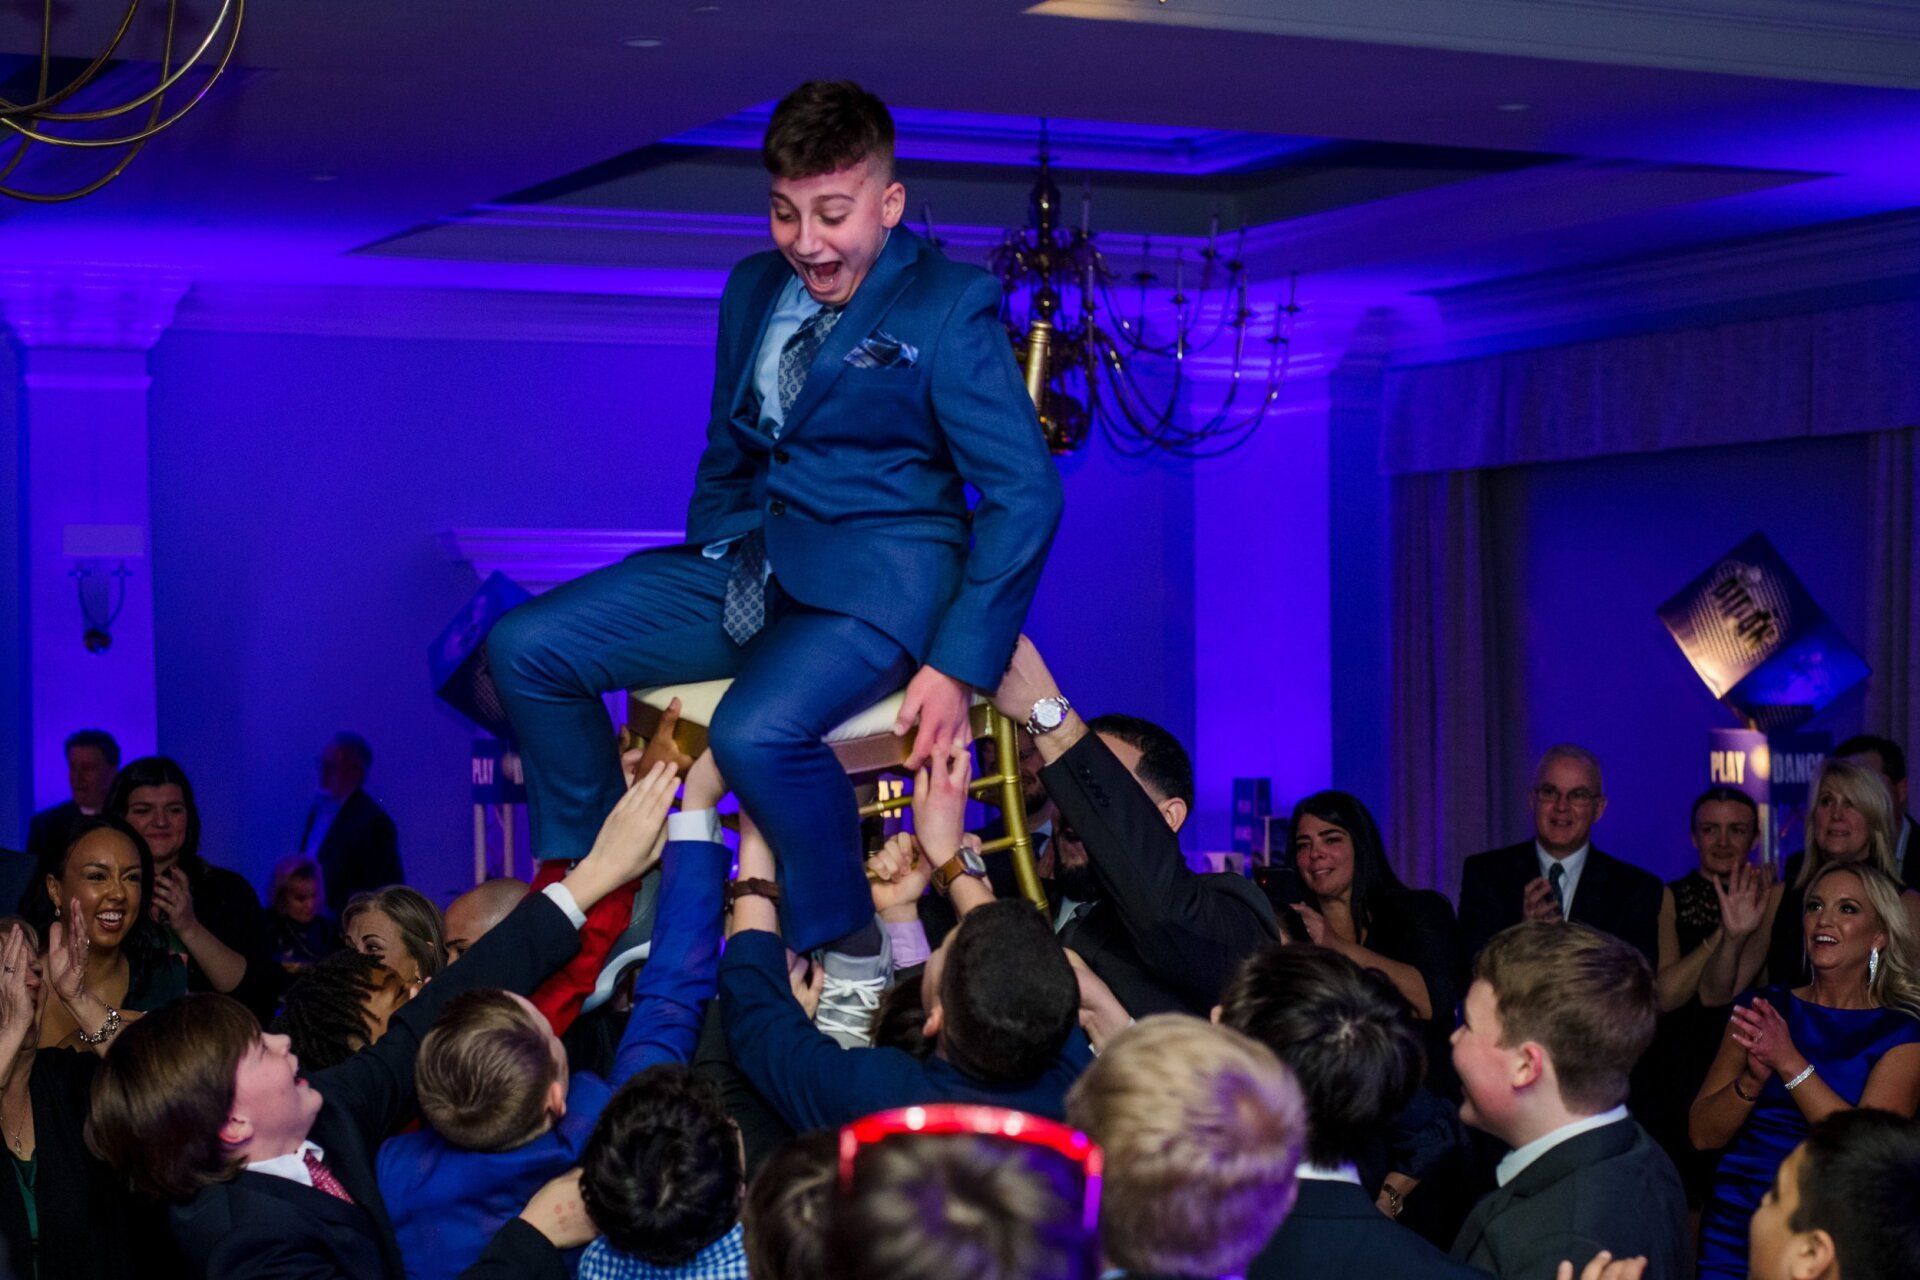 Bar Mitzvah chairlift ceremony with guests holding the boy high.